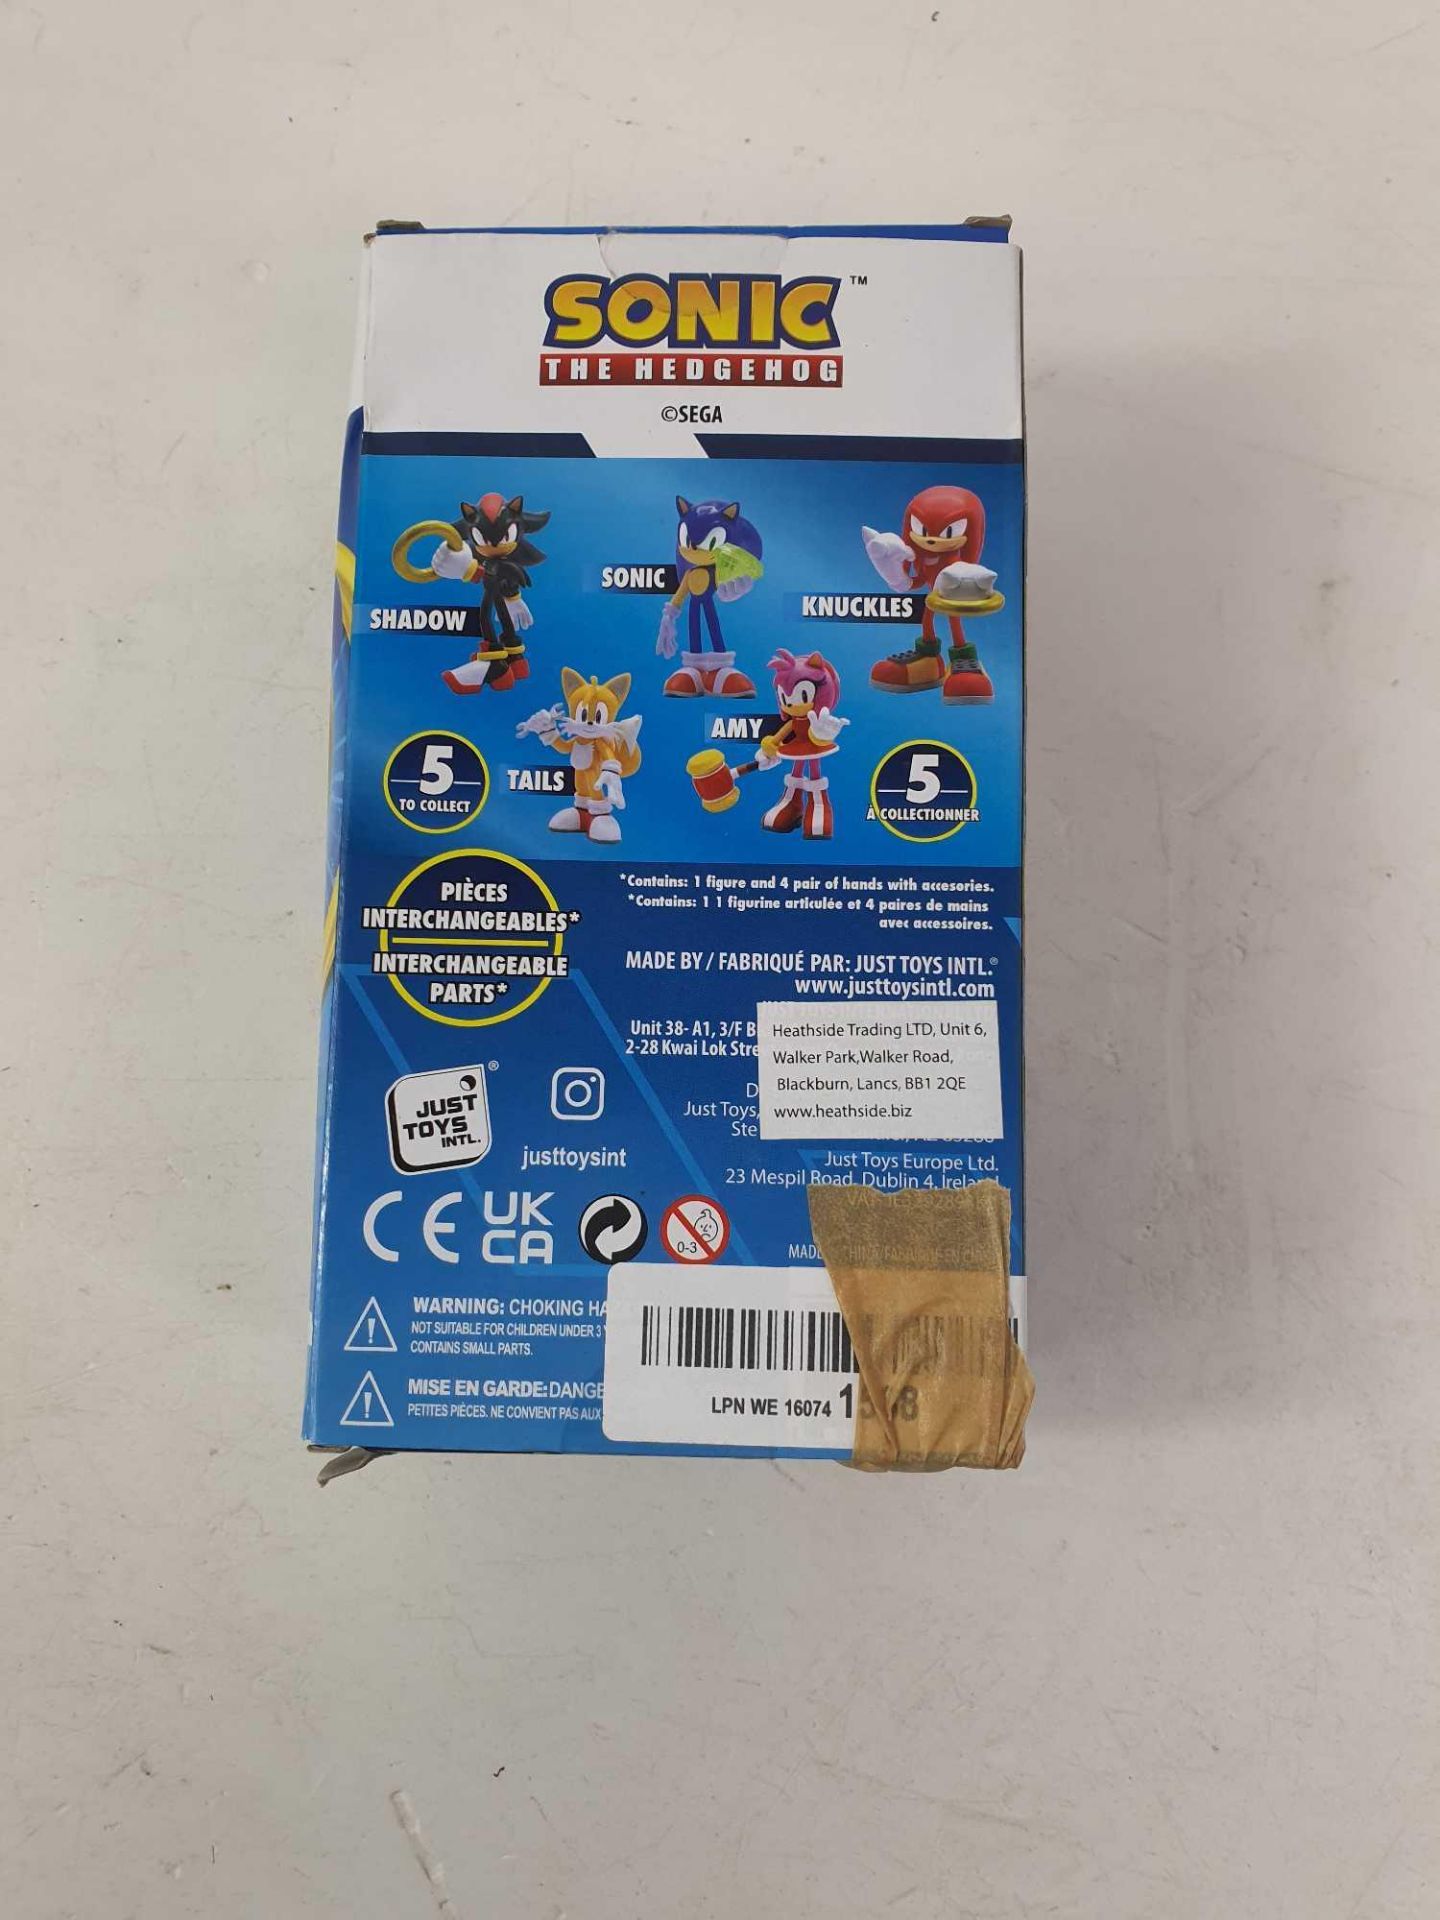 SONIC THE HEDGEHOG BUILDABLE FIGURE - Image 2 of 3